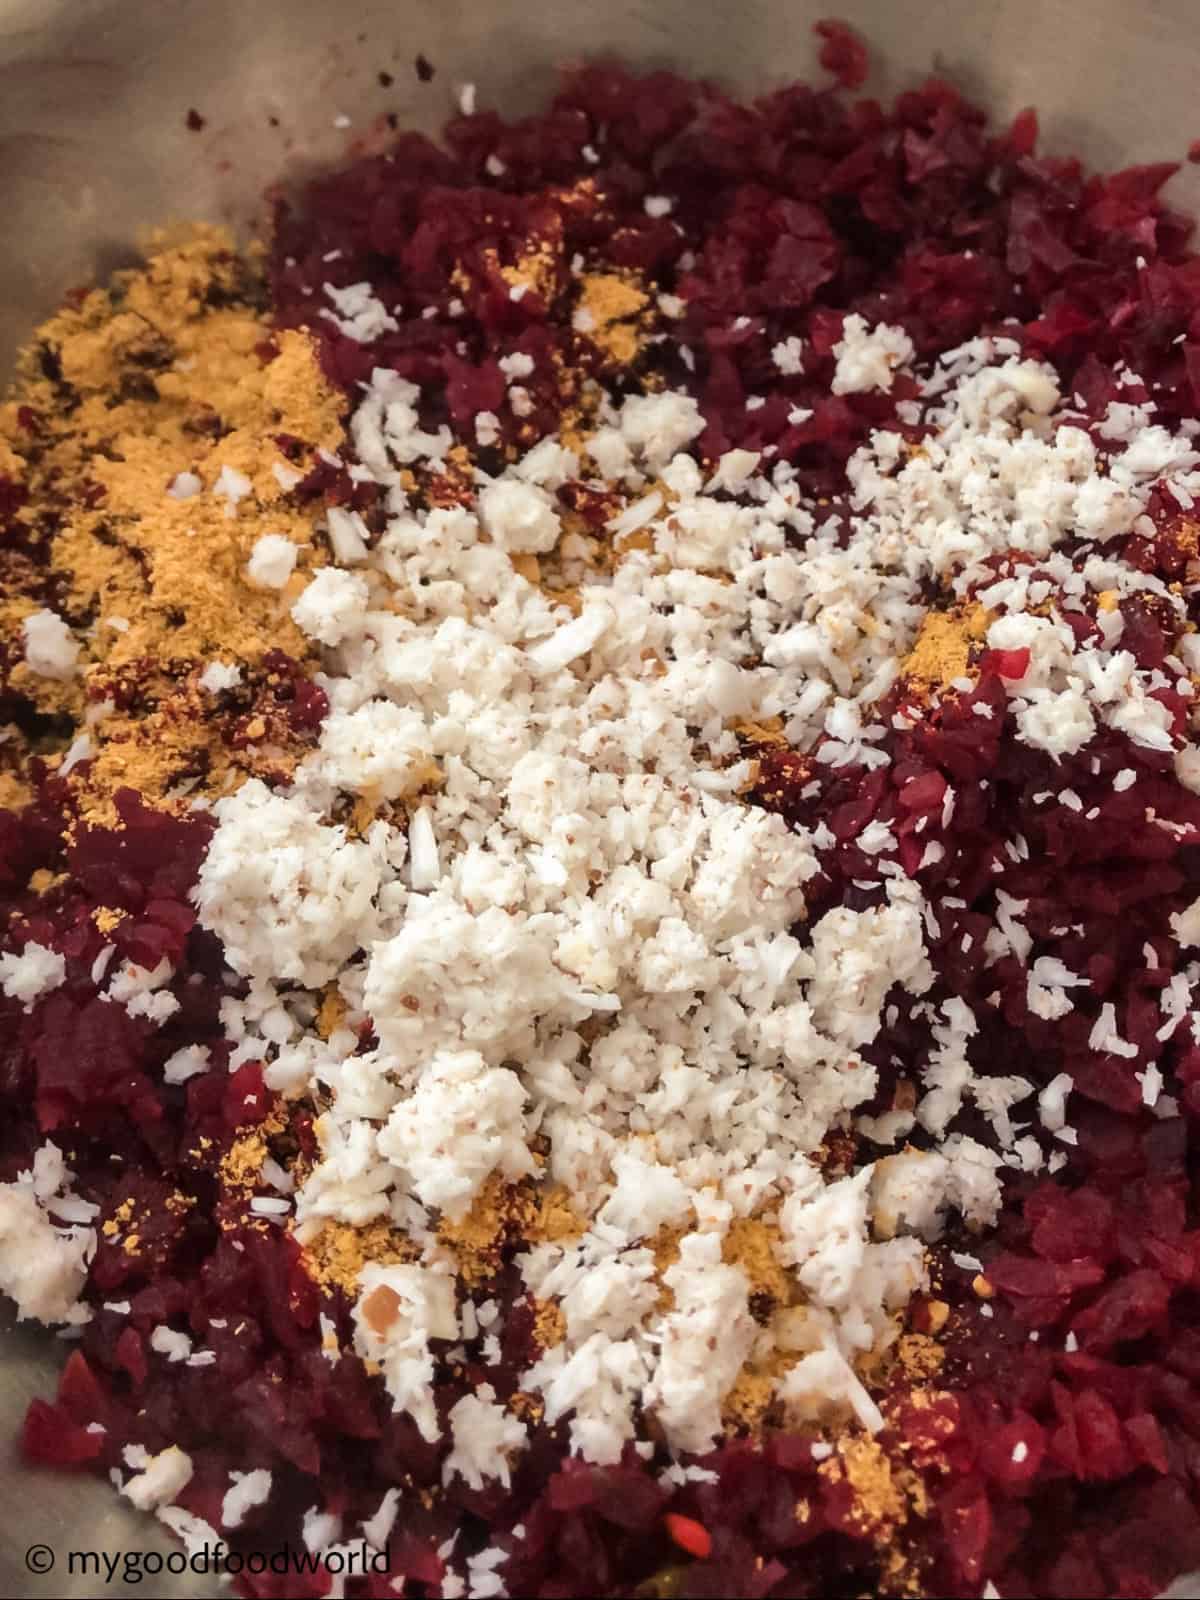 Freshly grated coconut is being added to beetroot thoran dish.